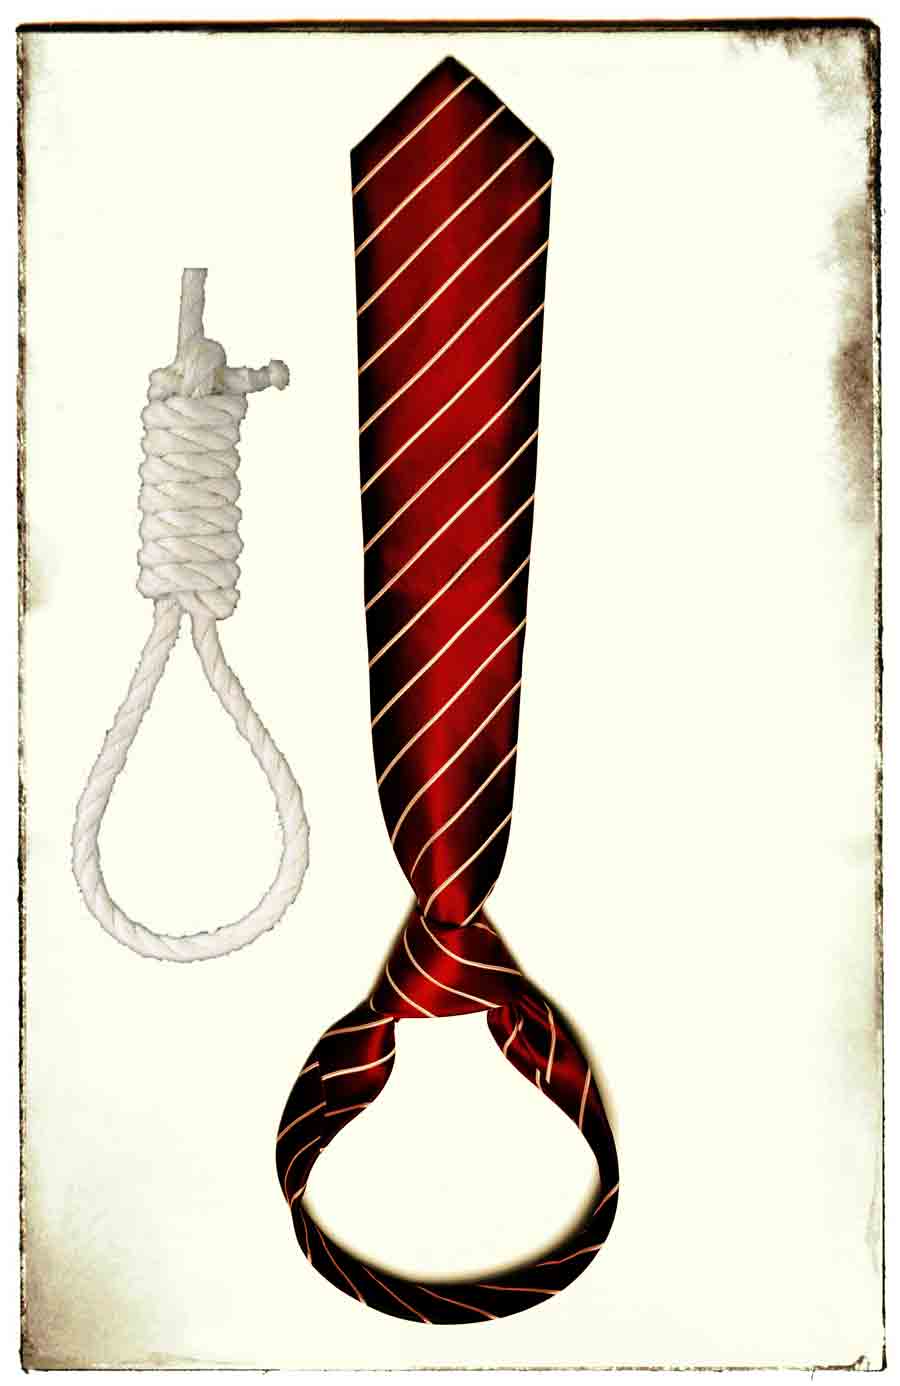 A tie hanging upside down next to a noose for comparison.